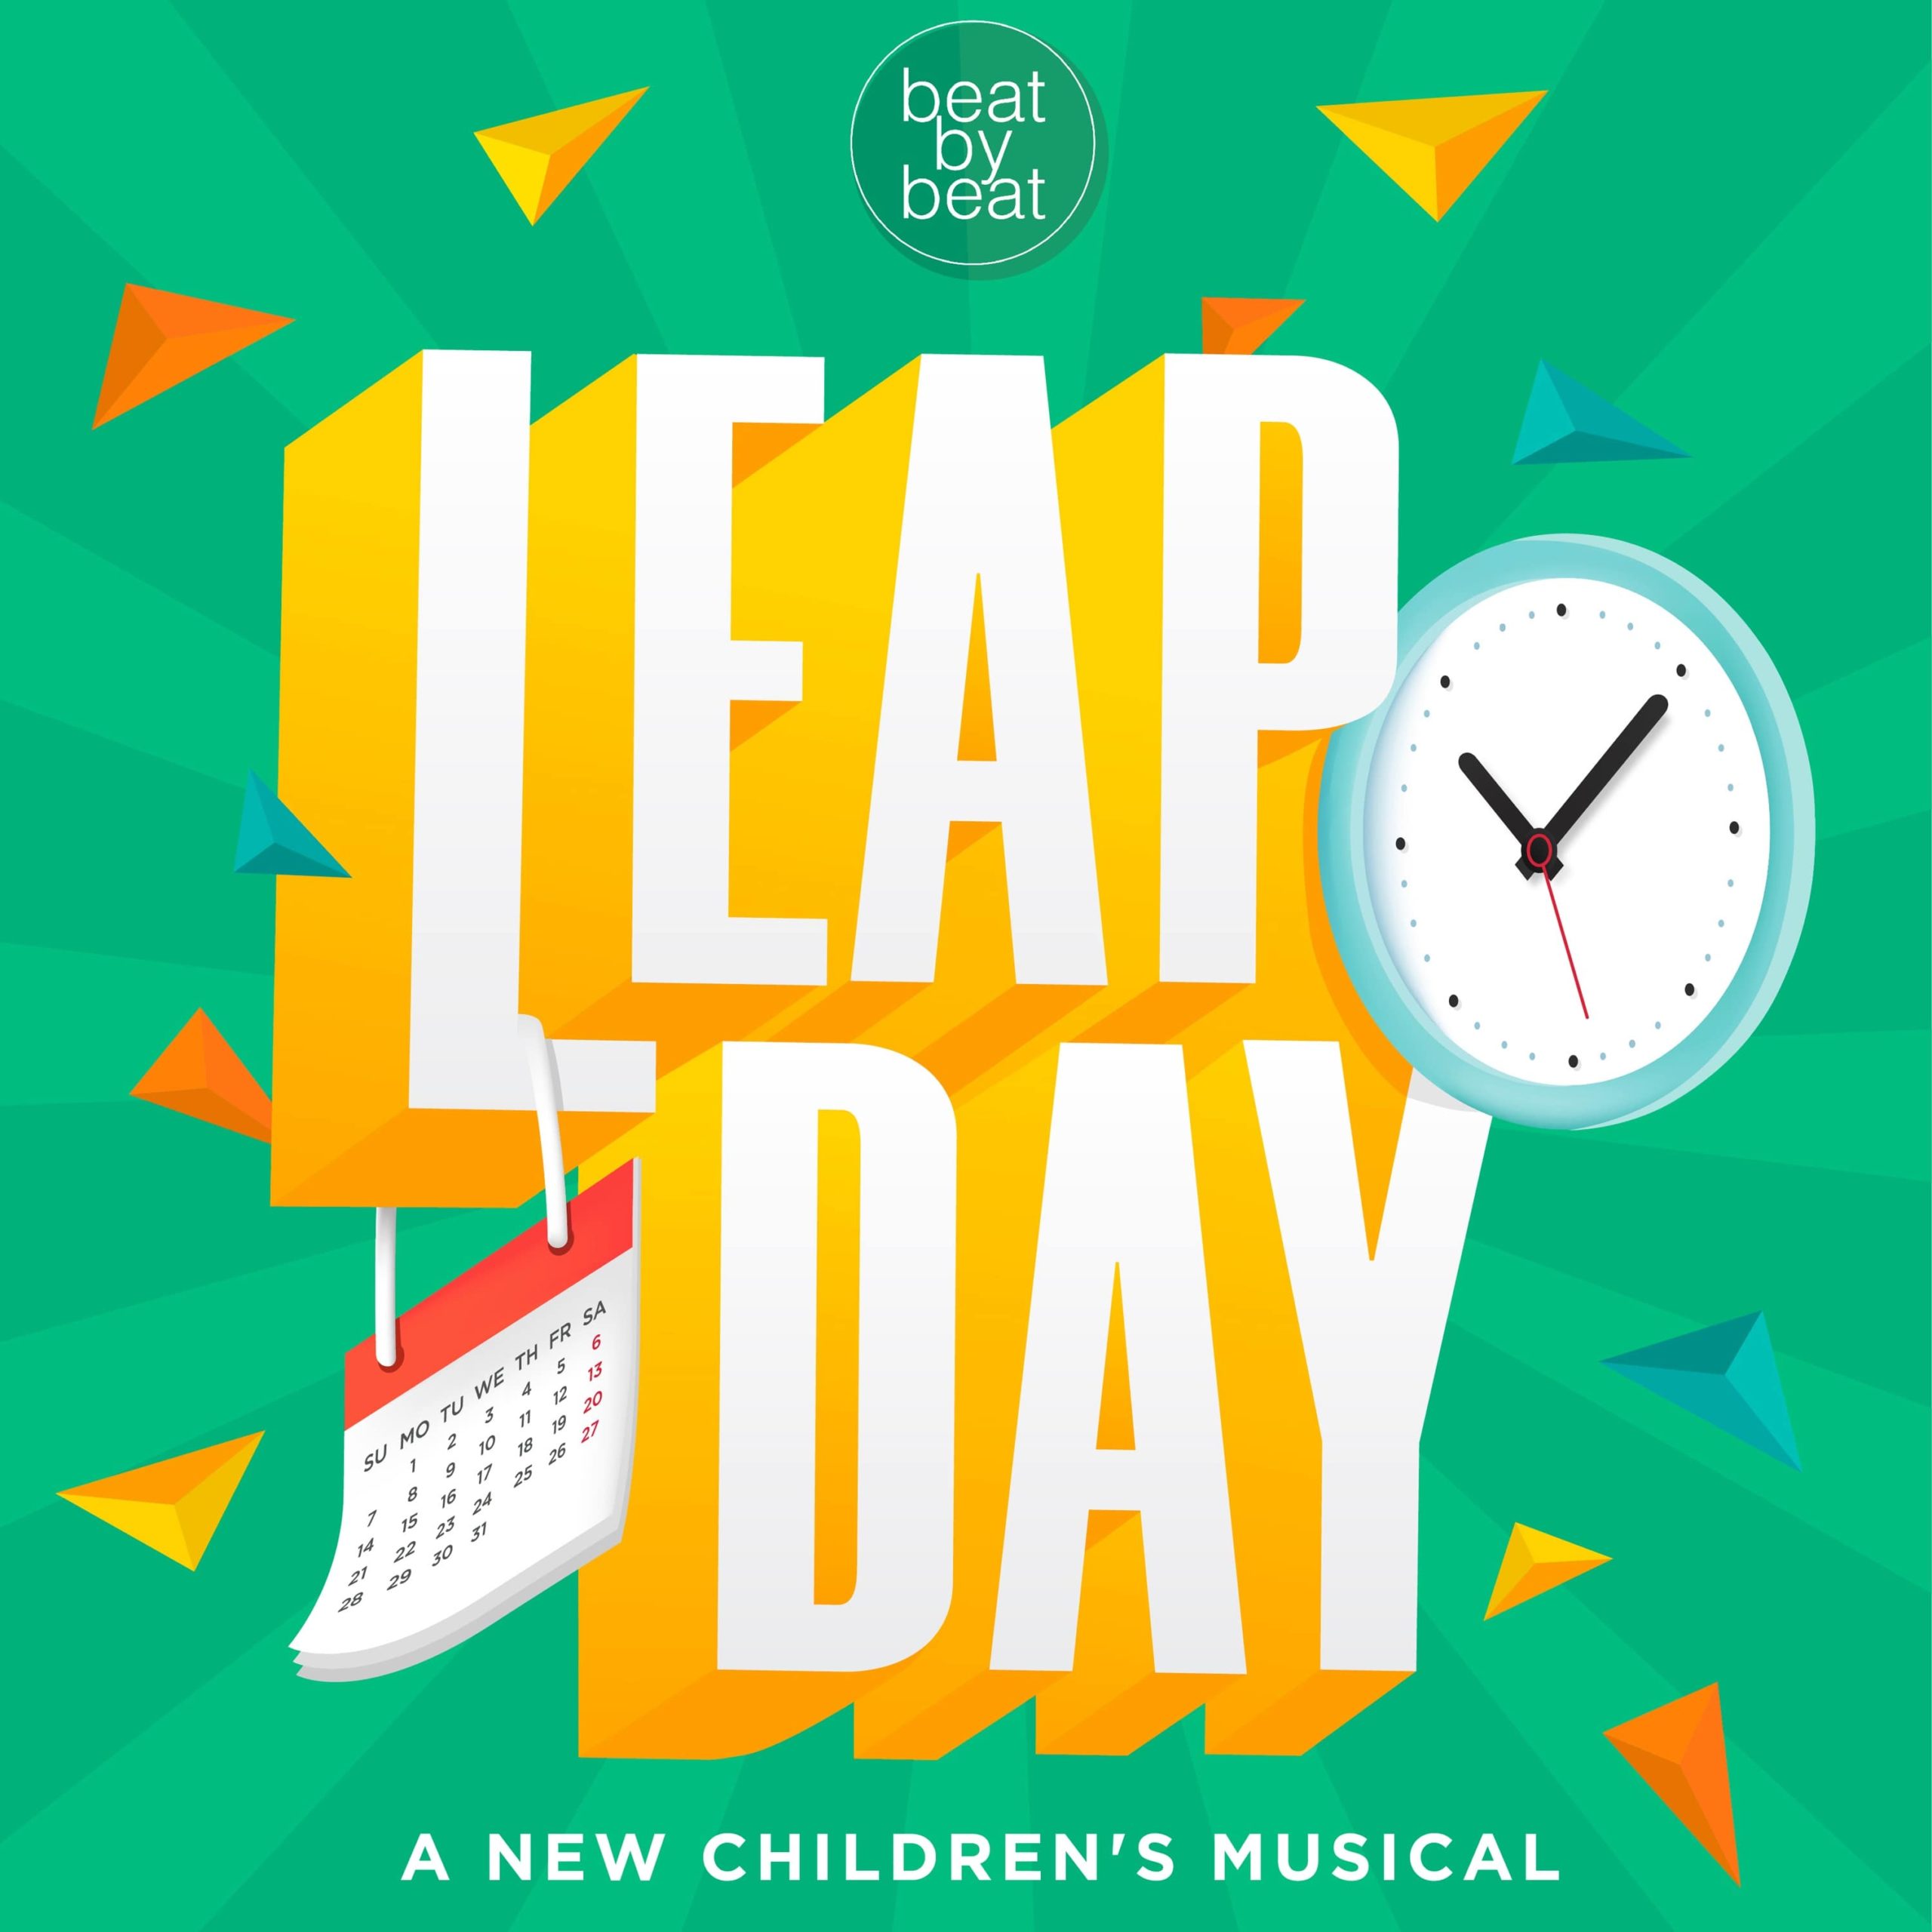 leap-day-a-new-children-s-musical-production-kit